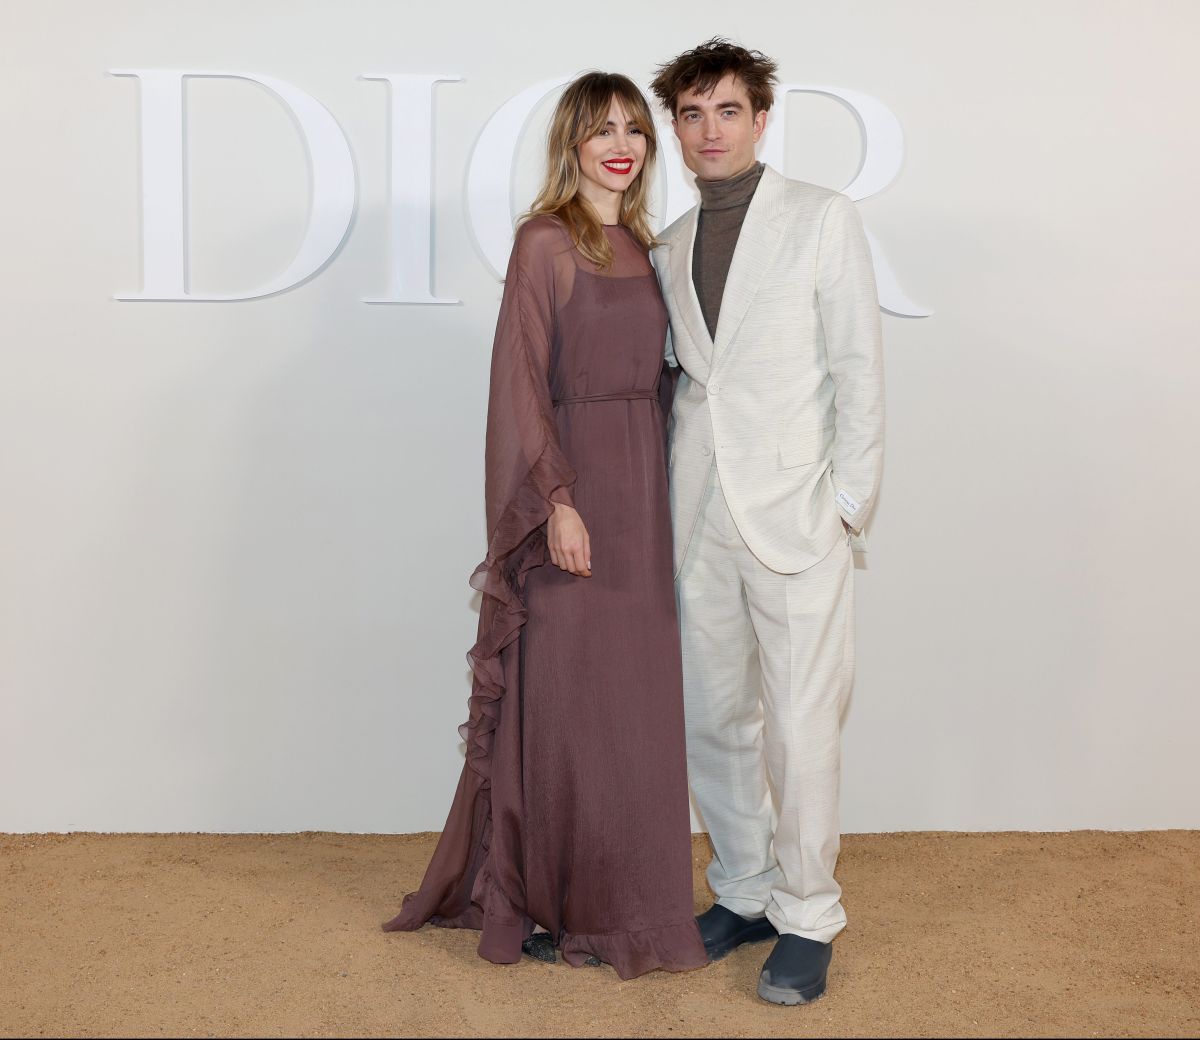 Robert Pattinson and Suki Waterhouse pose together for the first time on a red carpet